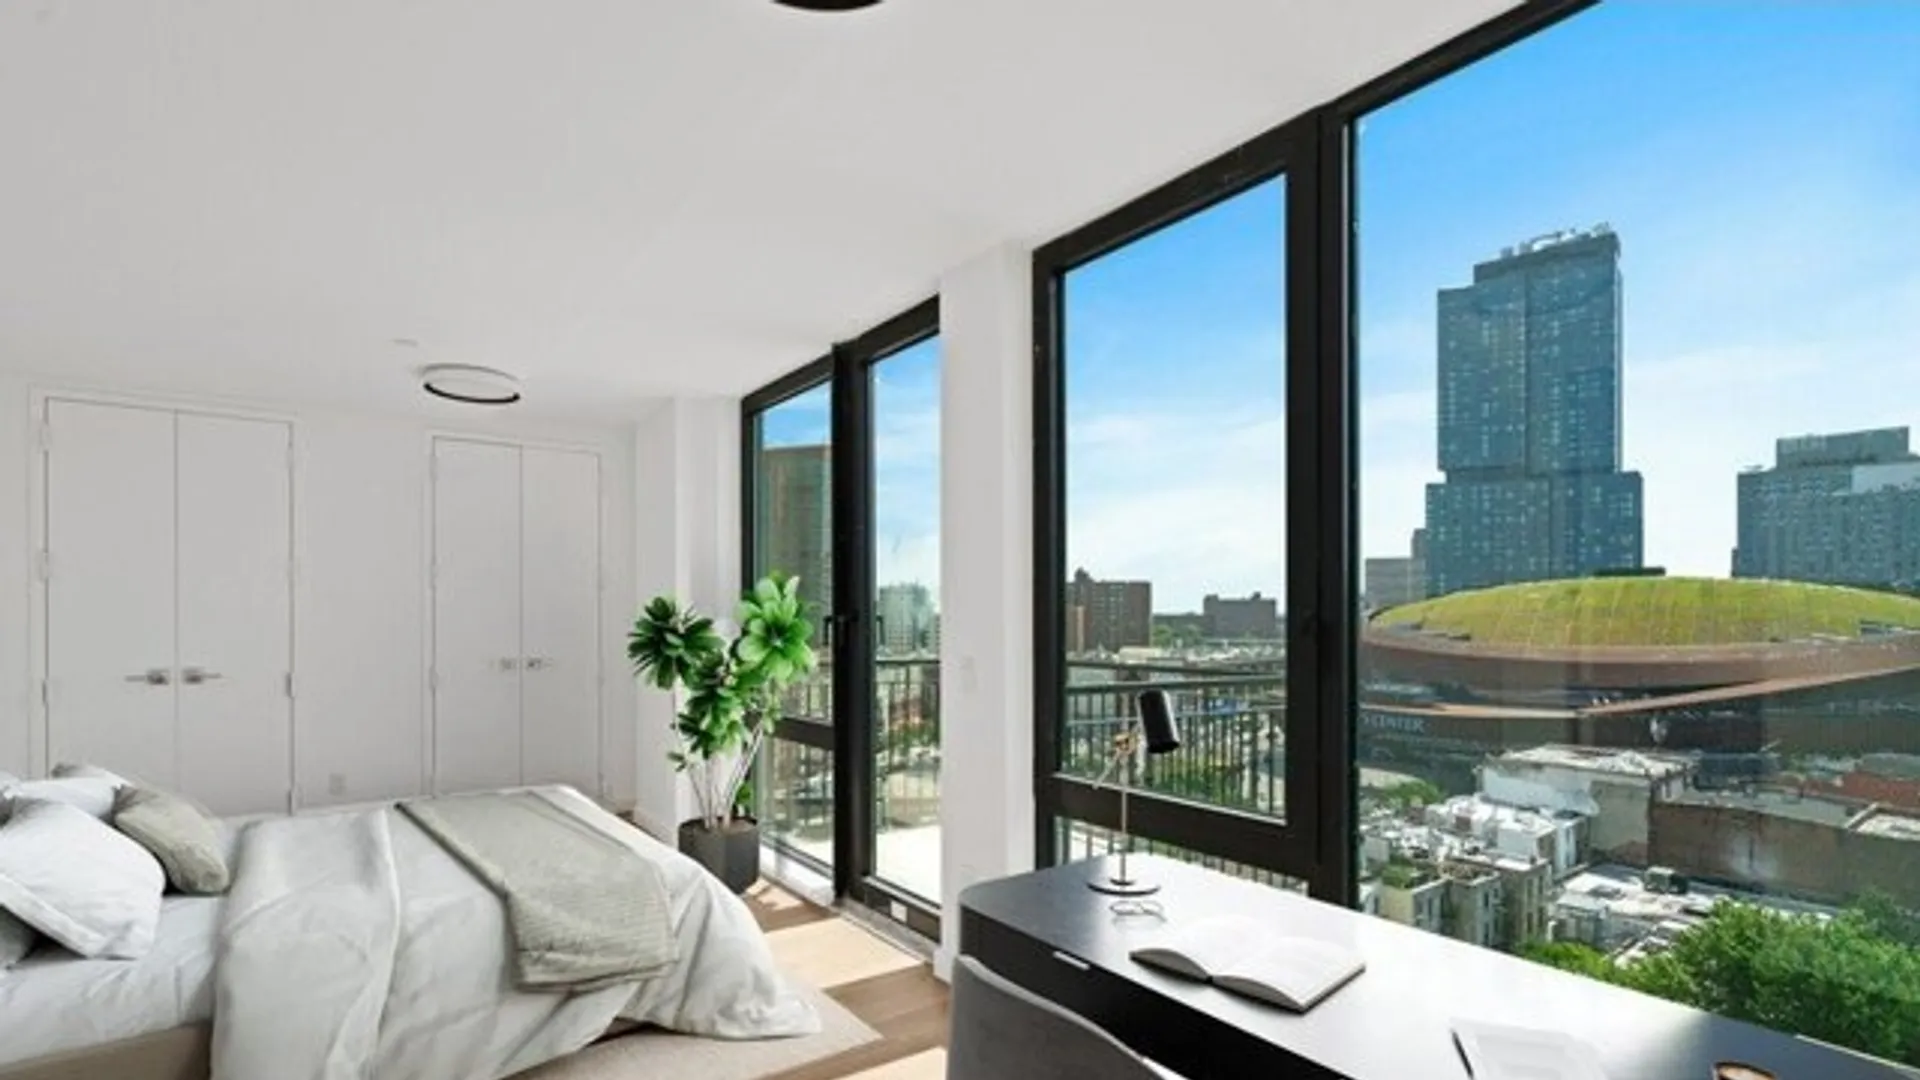 Atlantic Avenue–Barclays Center, Dean Street, New York, NY 11213, USA | 1 bed house for rent